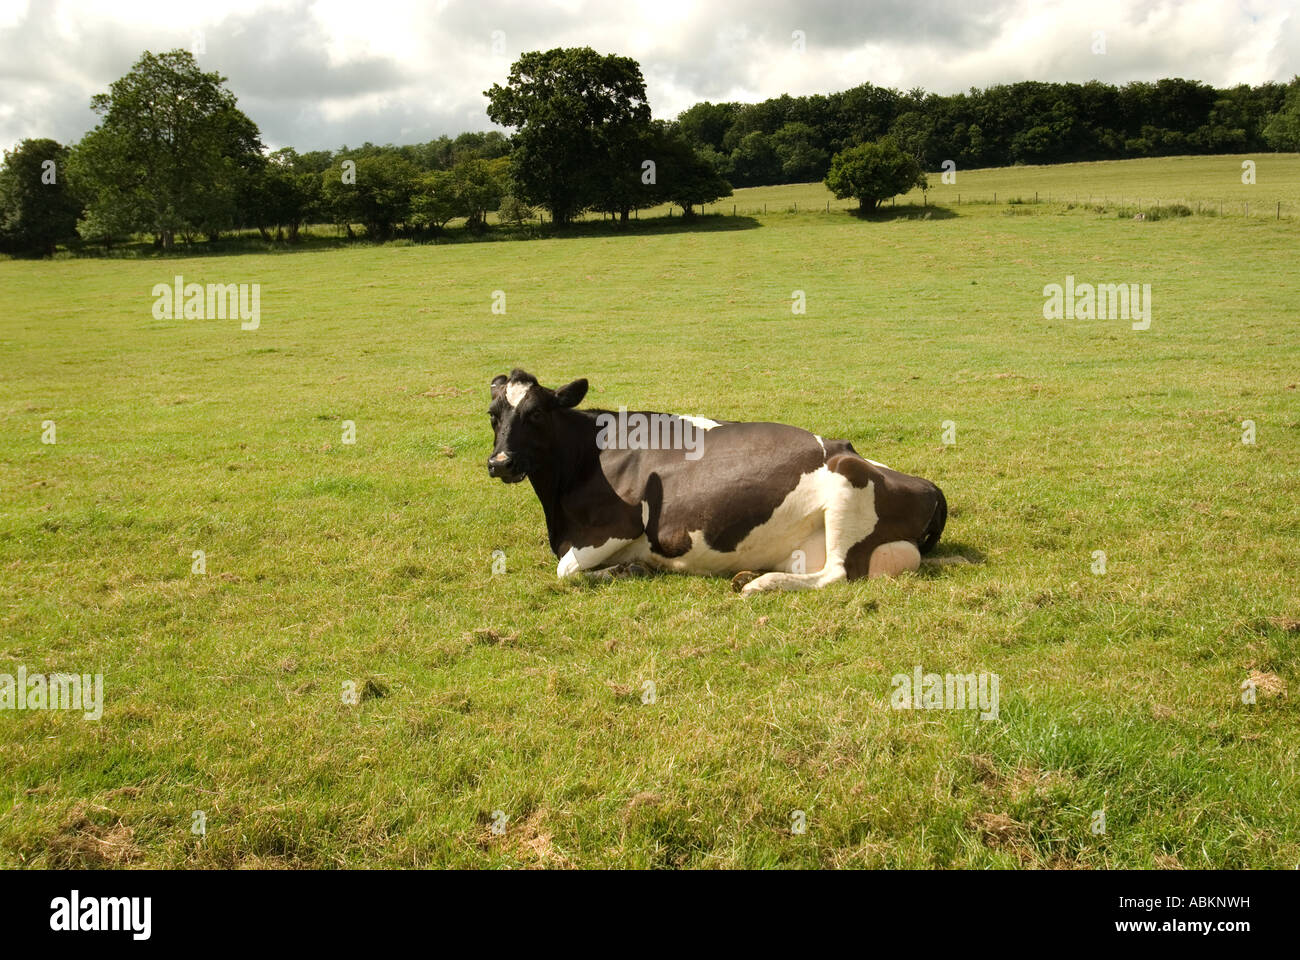 cow laying down in a field with rain clouds Stock Photo